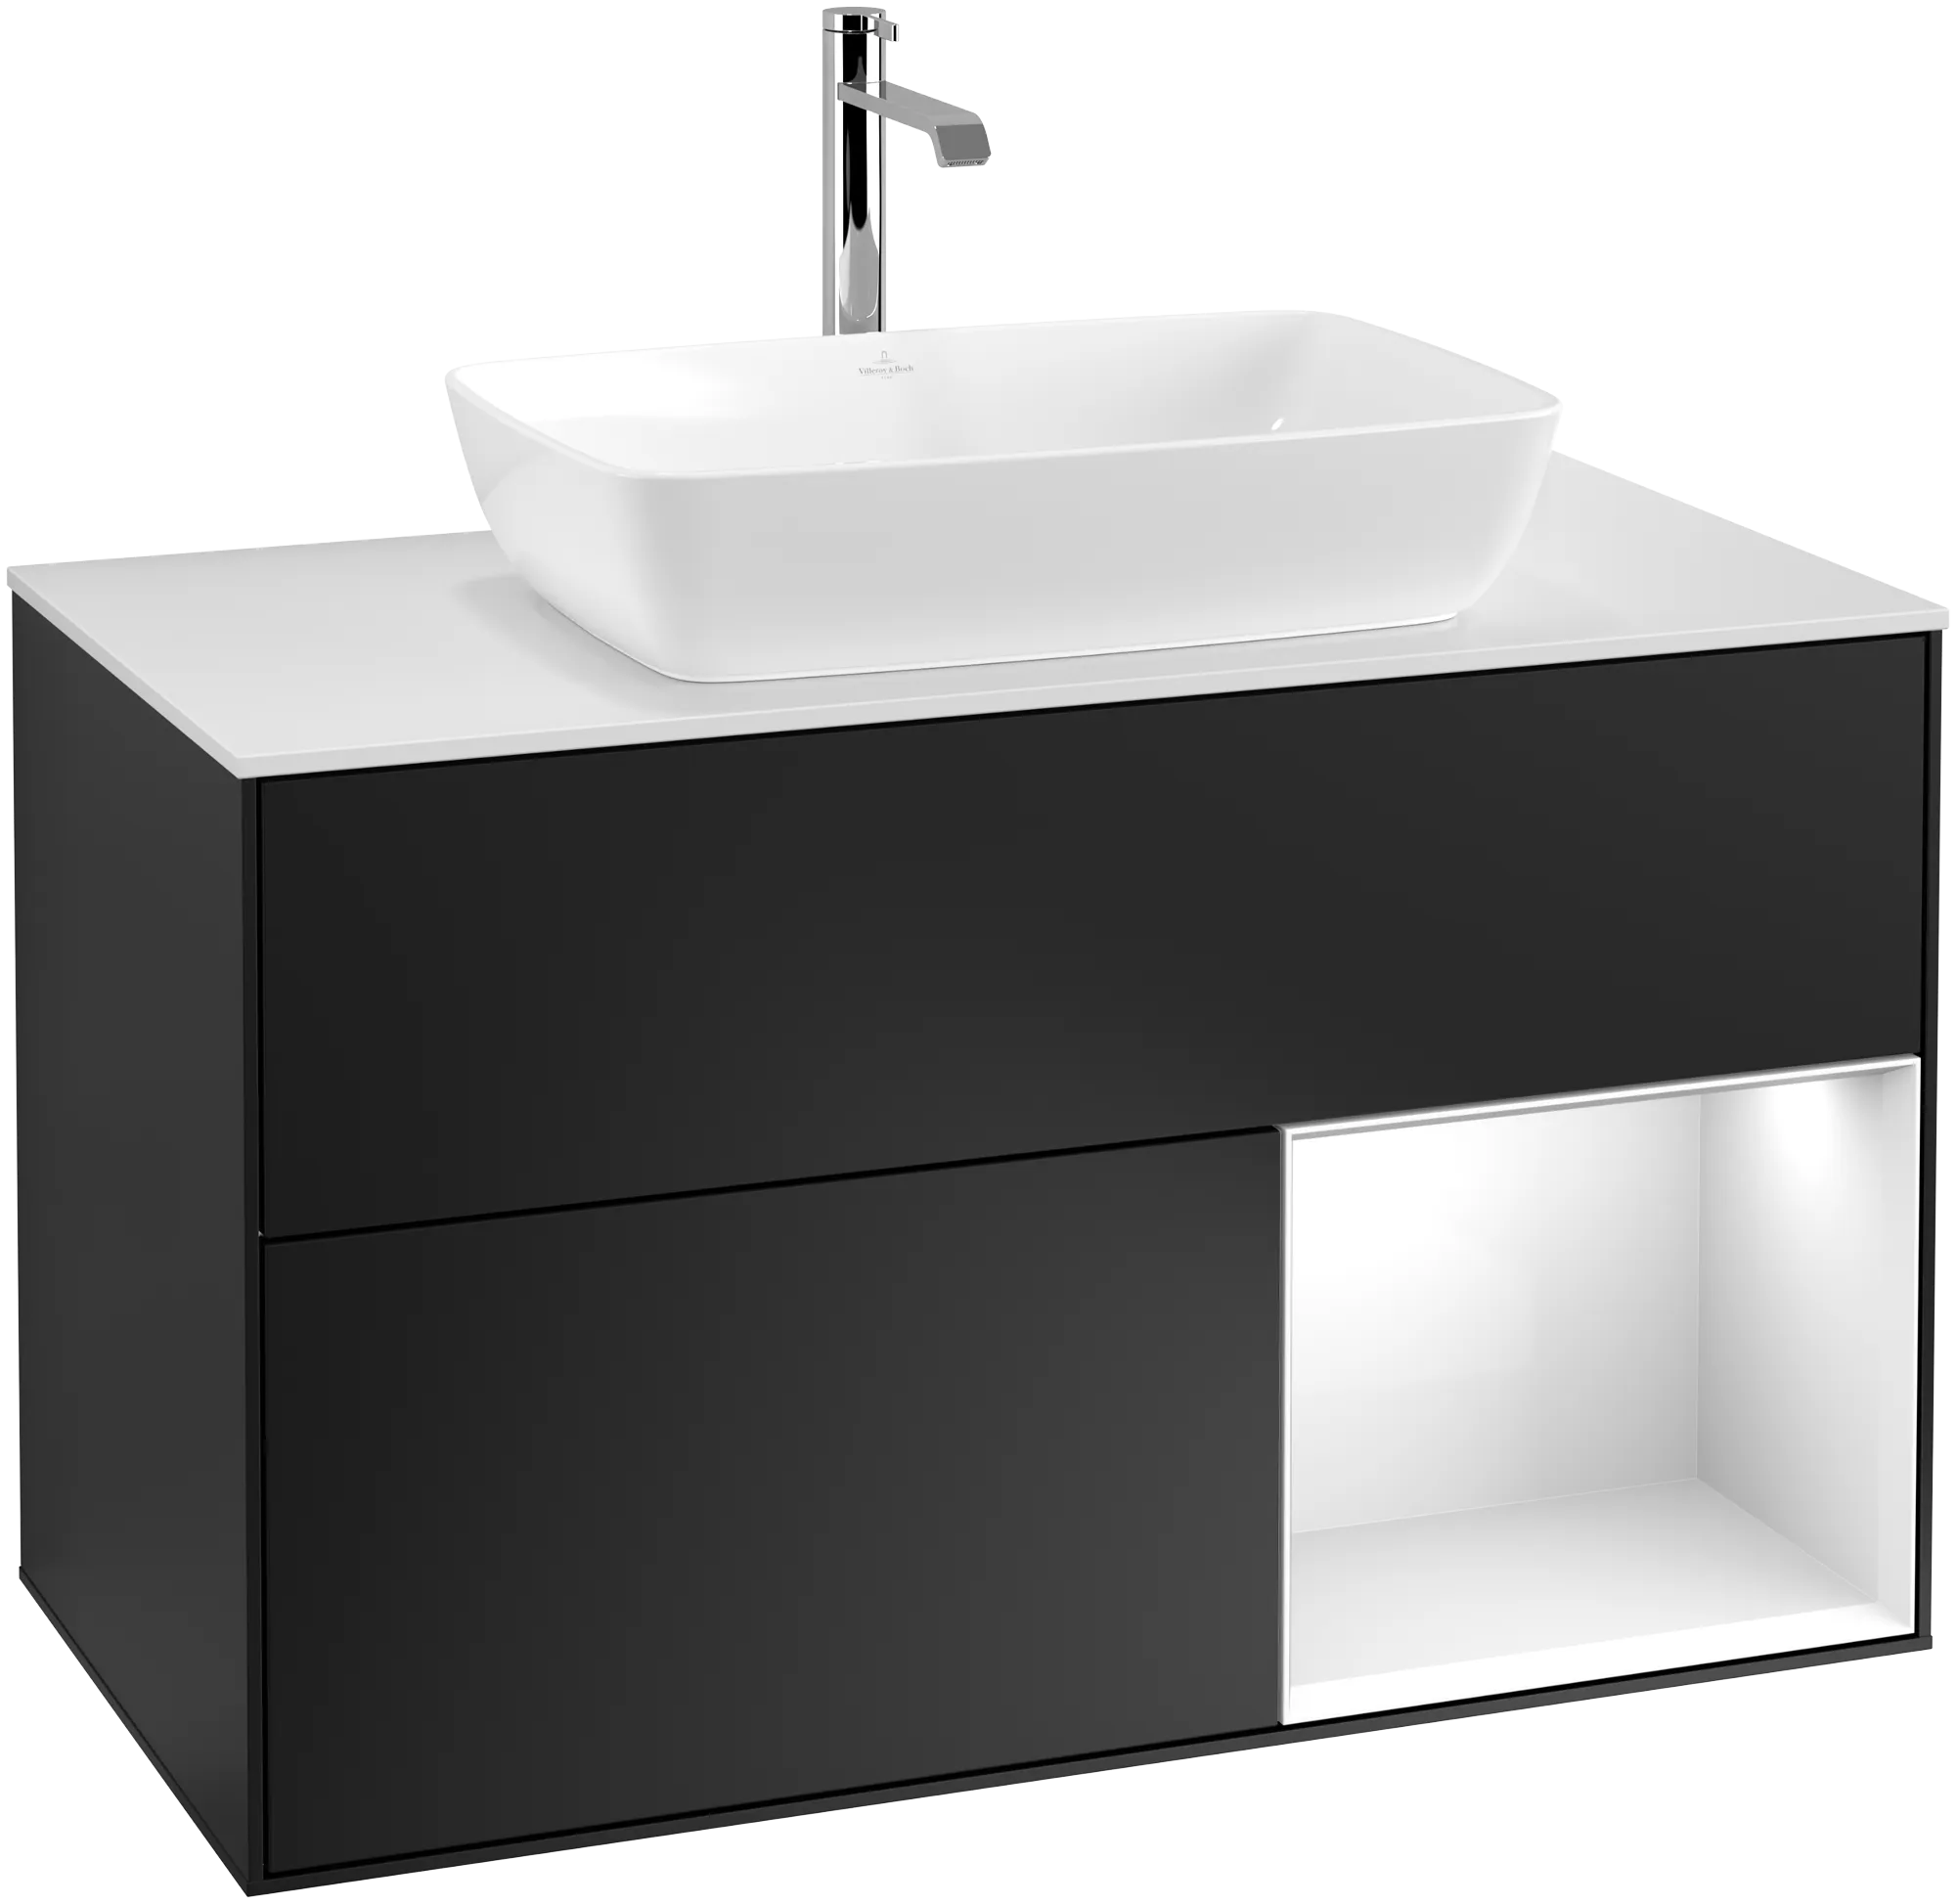 Зображення з  VILLEROY BOCH Finion Vanity unit, with lighting, 2 pull-out compartments, 1000 x 603 x 501 mm, Black Matt Lacquer / Glossy White Lacquer / Glass White Matt #G781GFPD